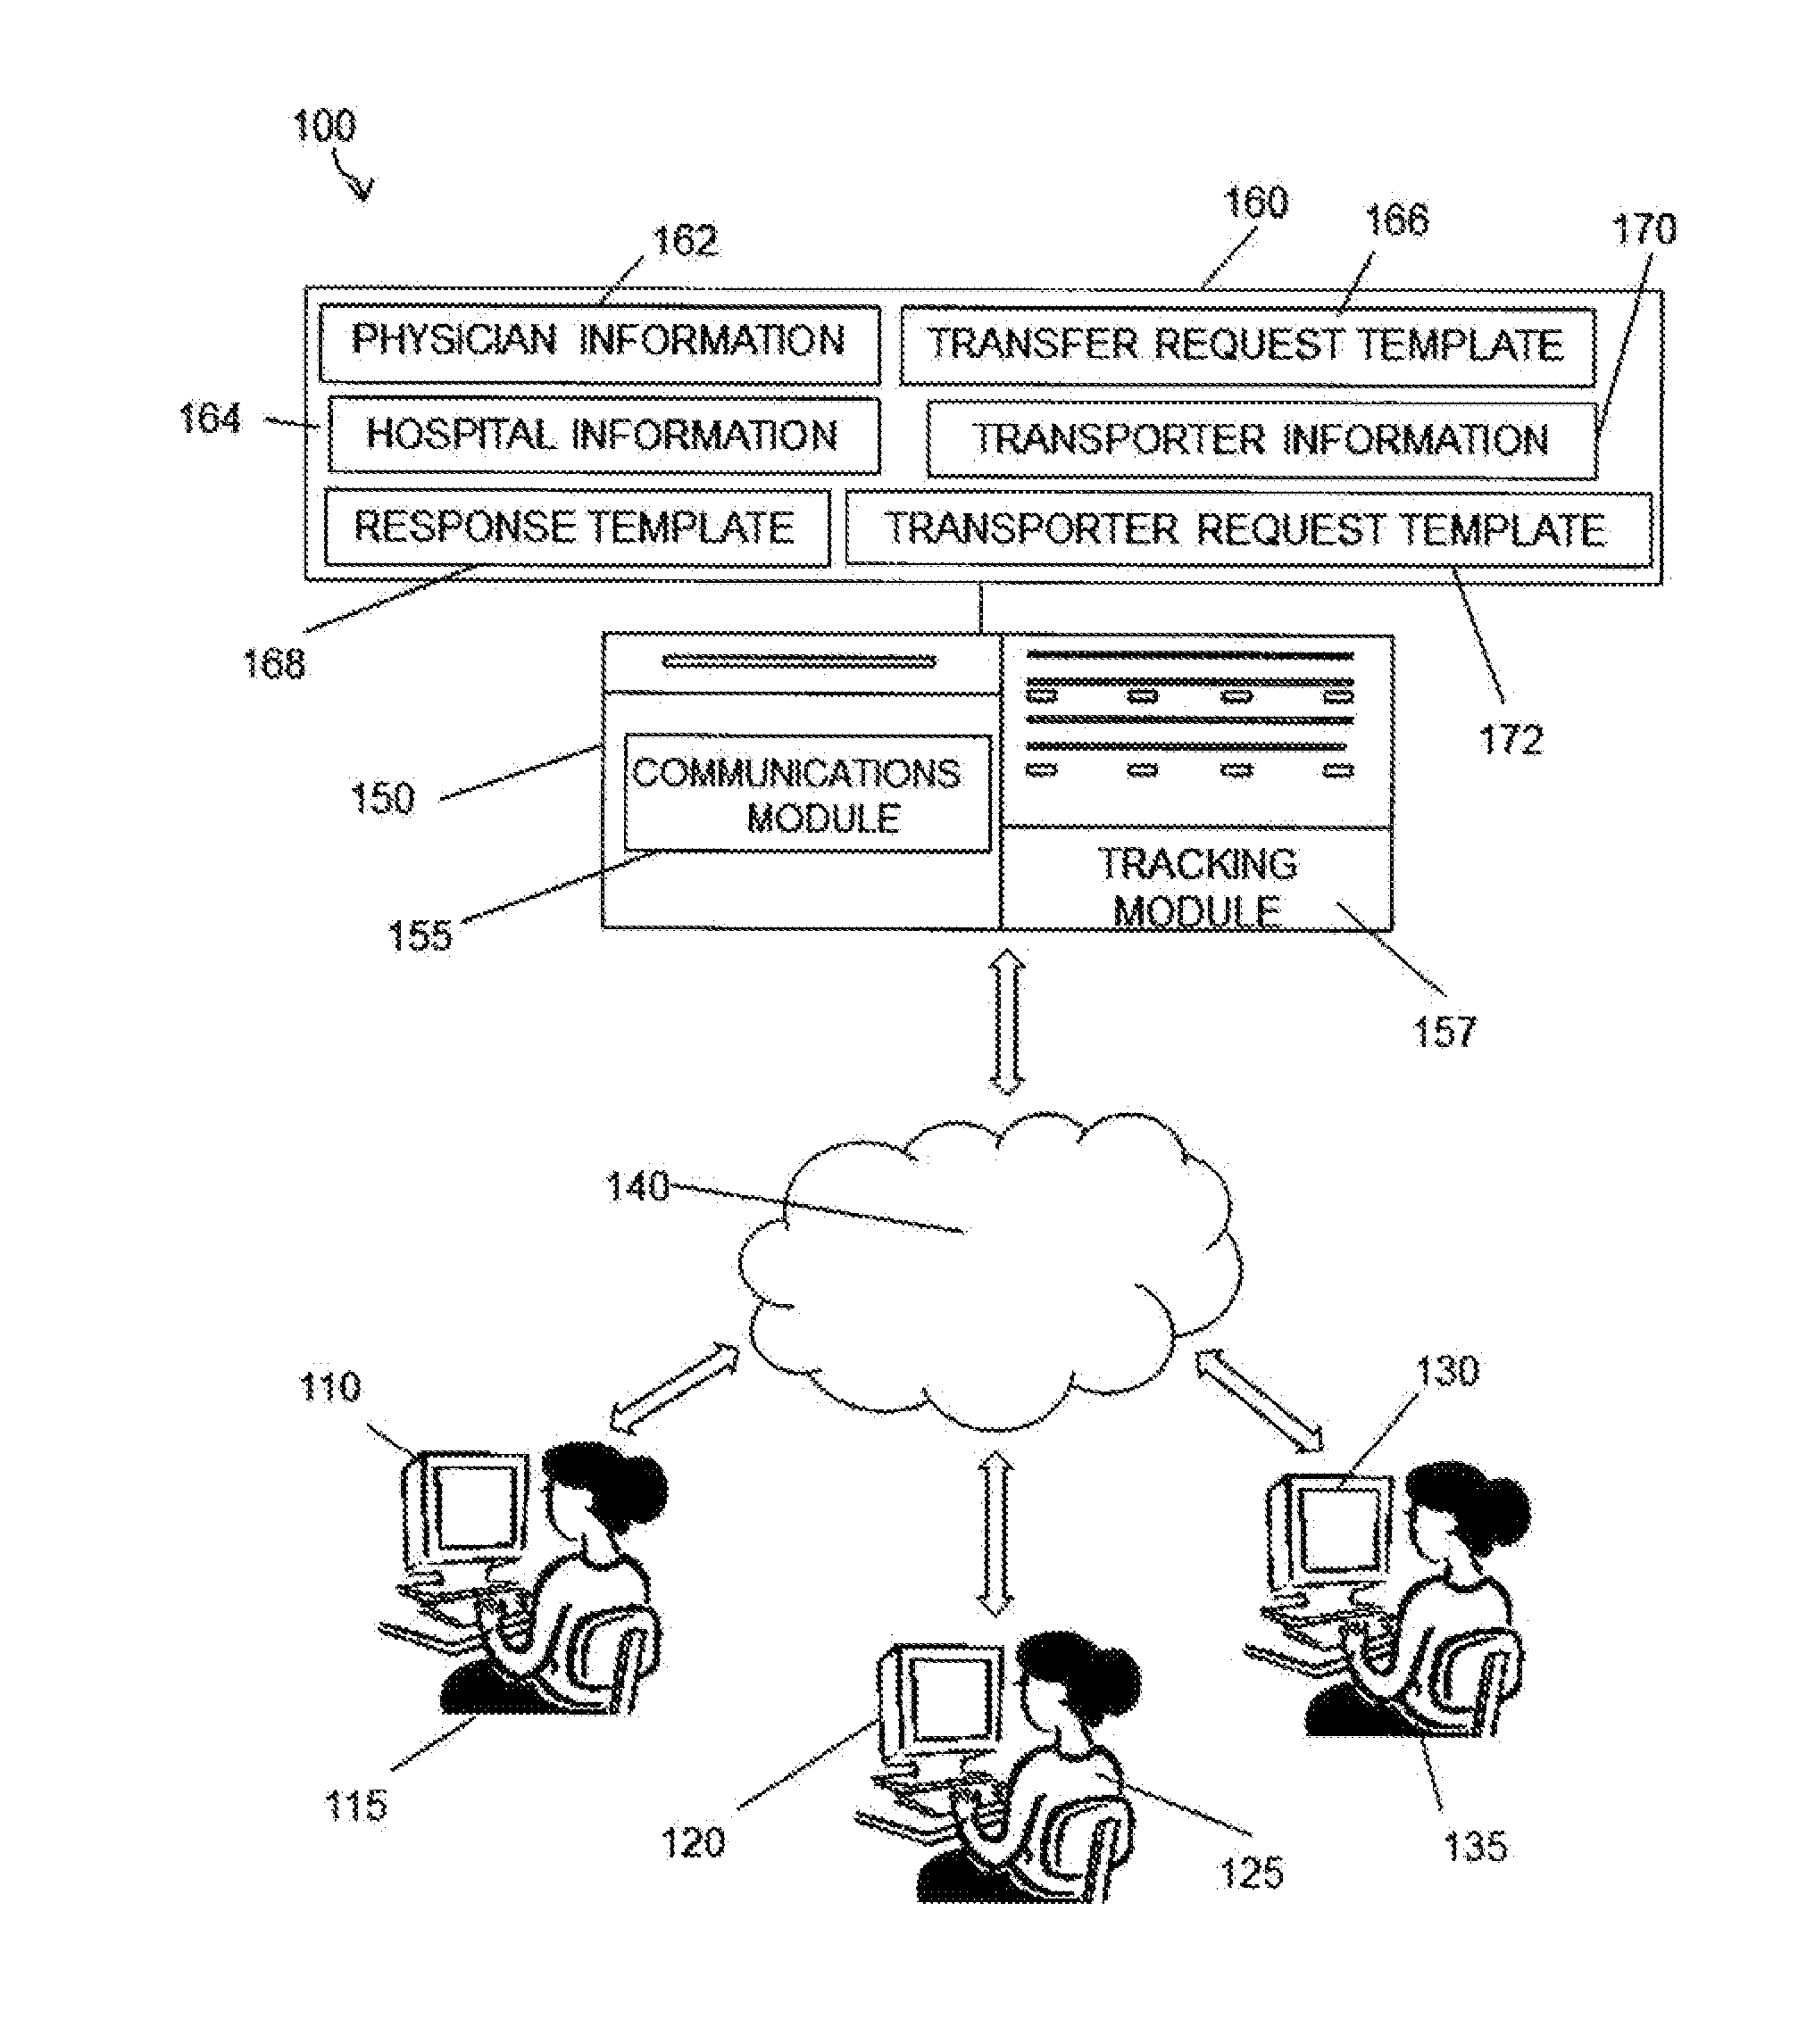 System and Method for Transferring Patients Between Hospitals